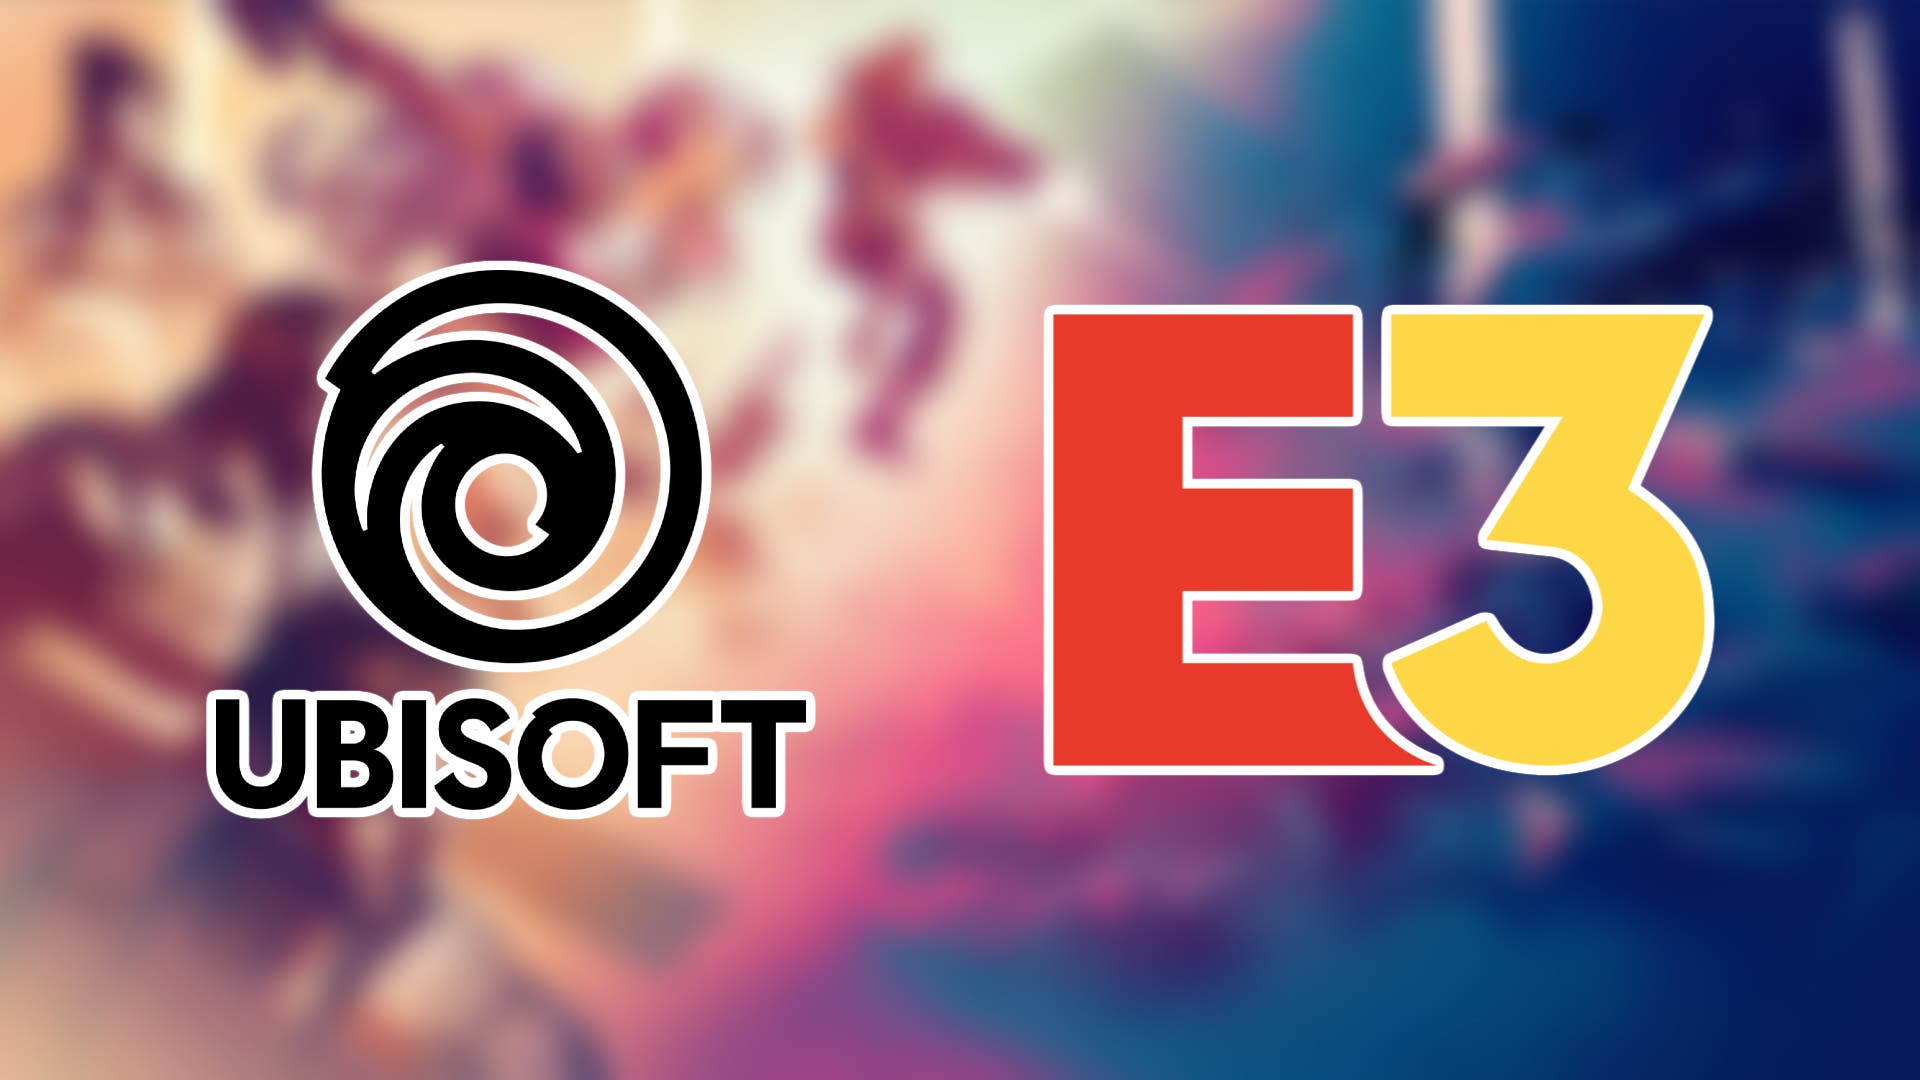 At Ubisoft, they don’t know if there will be E3 2023, but if so, they will be present and will have “a lot to show”